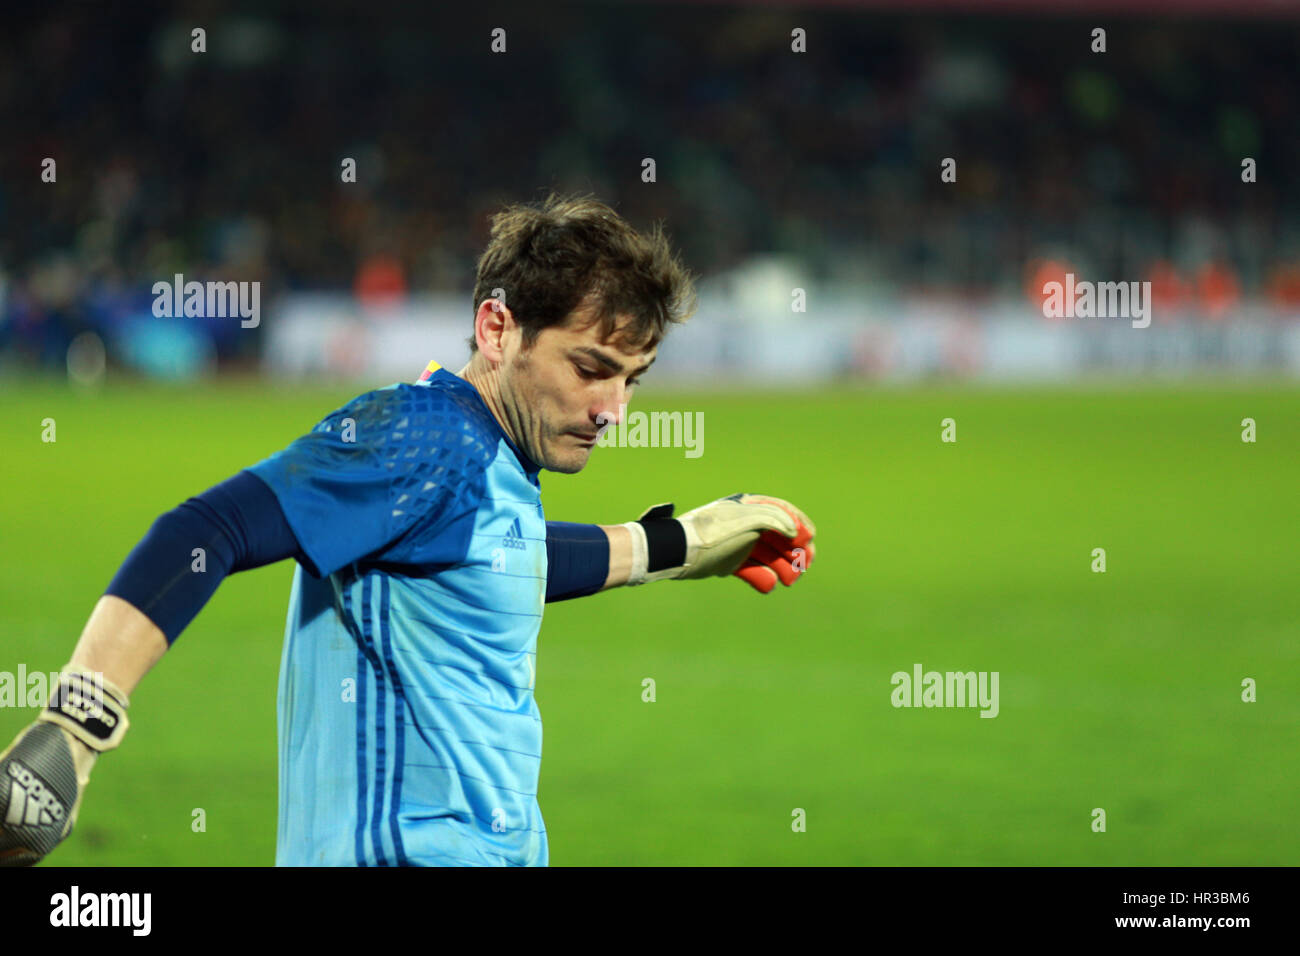 CLUJ-NAPOCA, ROMANIA - MARCH 27, 2016: Iker Casillas, the goalkeeper of the National Football Team of Spain playing against Romania in friendly match  Stock Photo